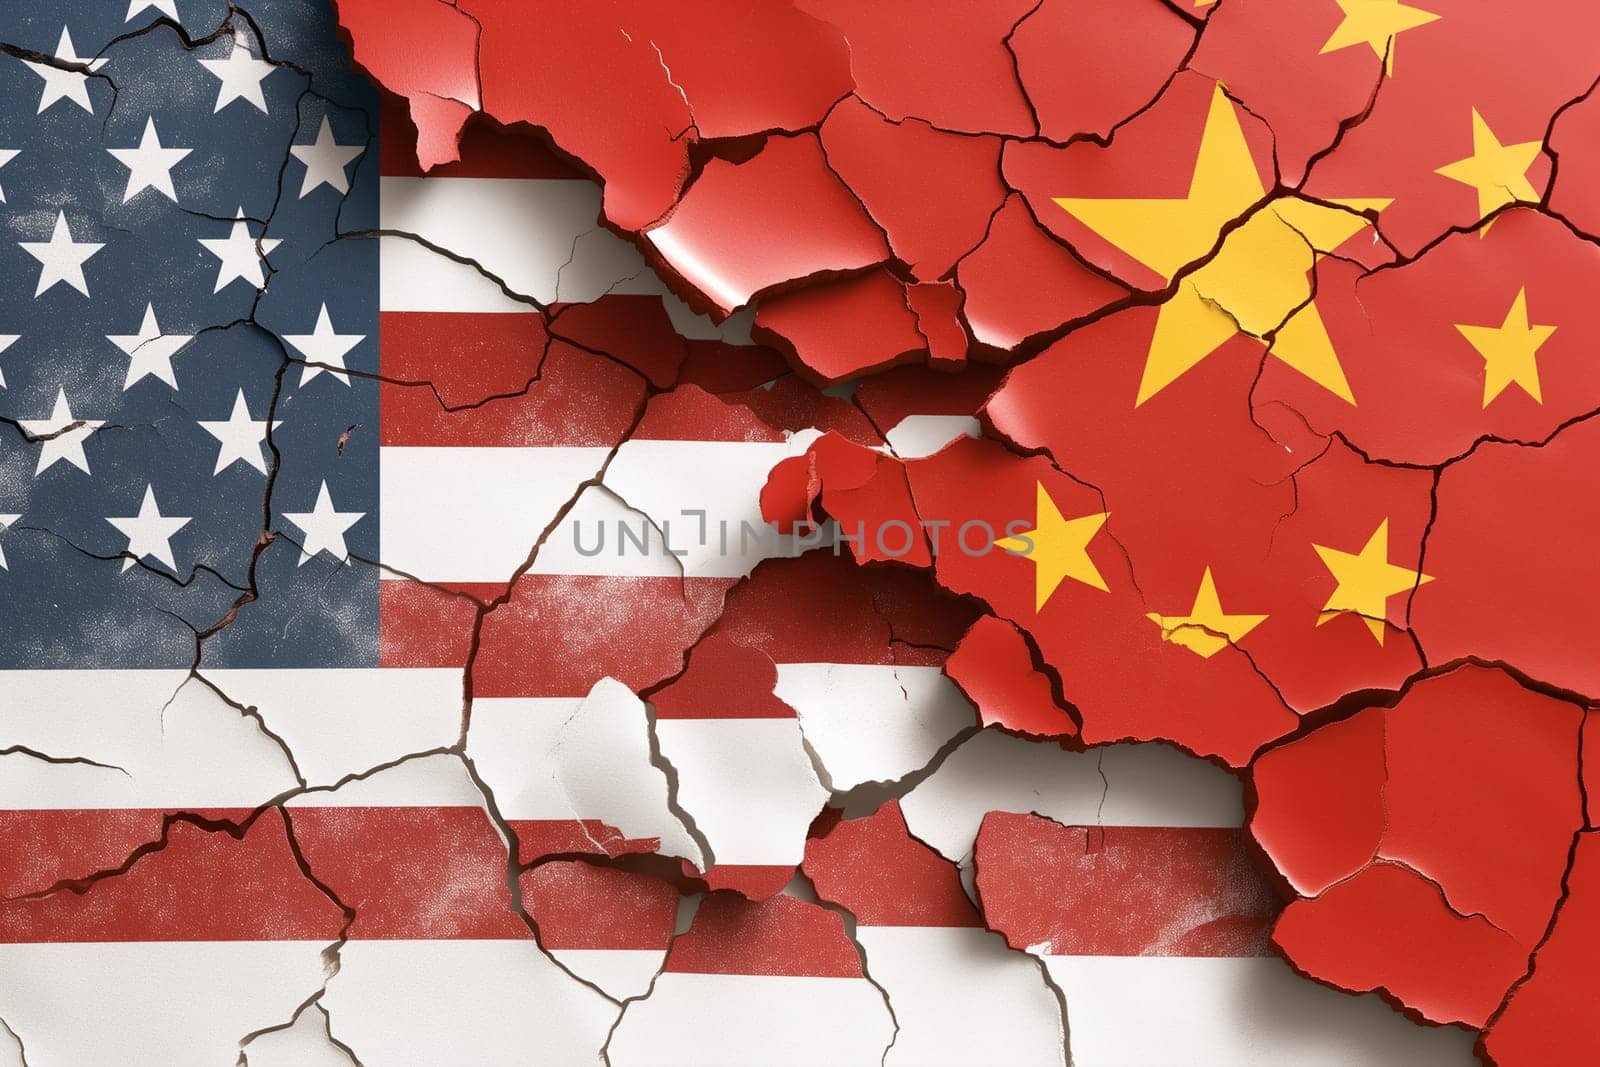 The American and China flags are visibly cracked apart, symbolizing a rift between the two nations.